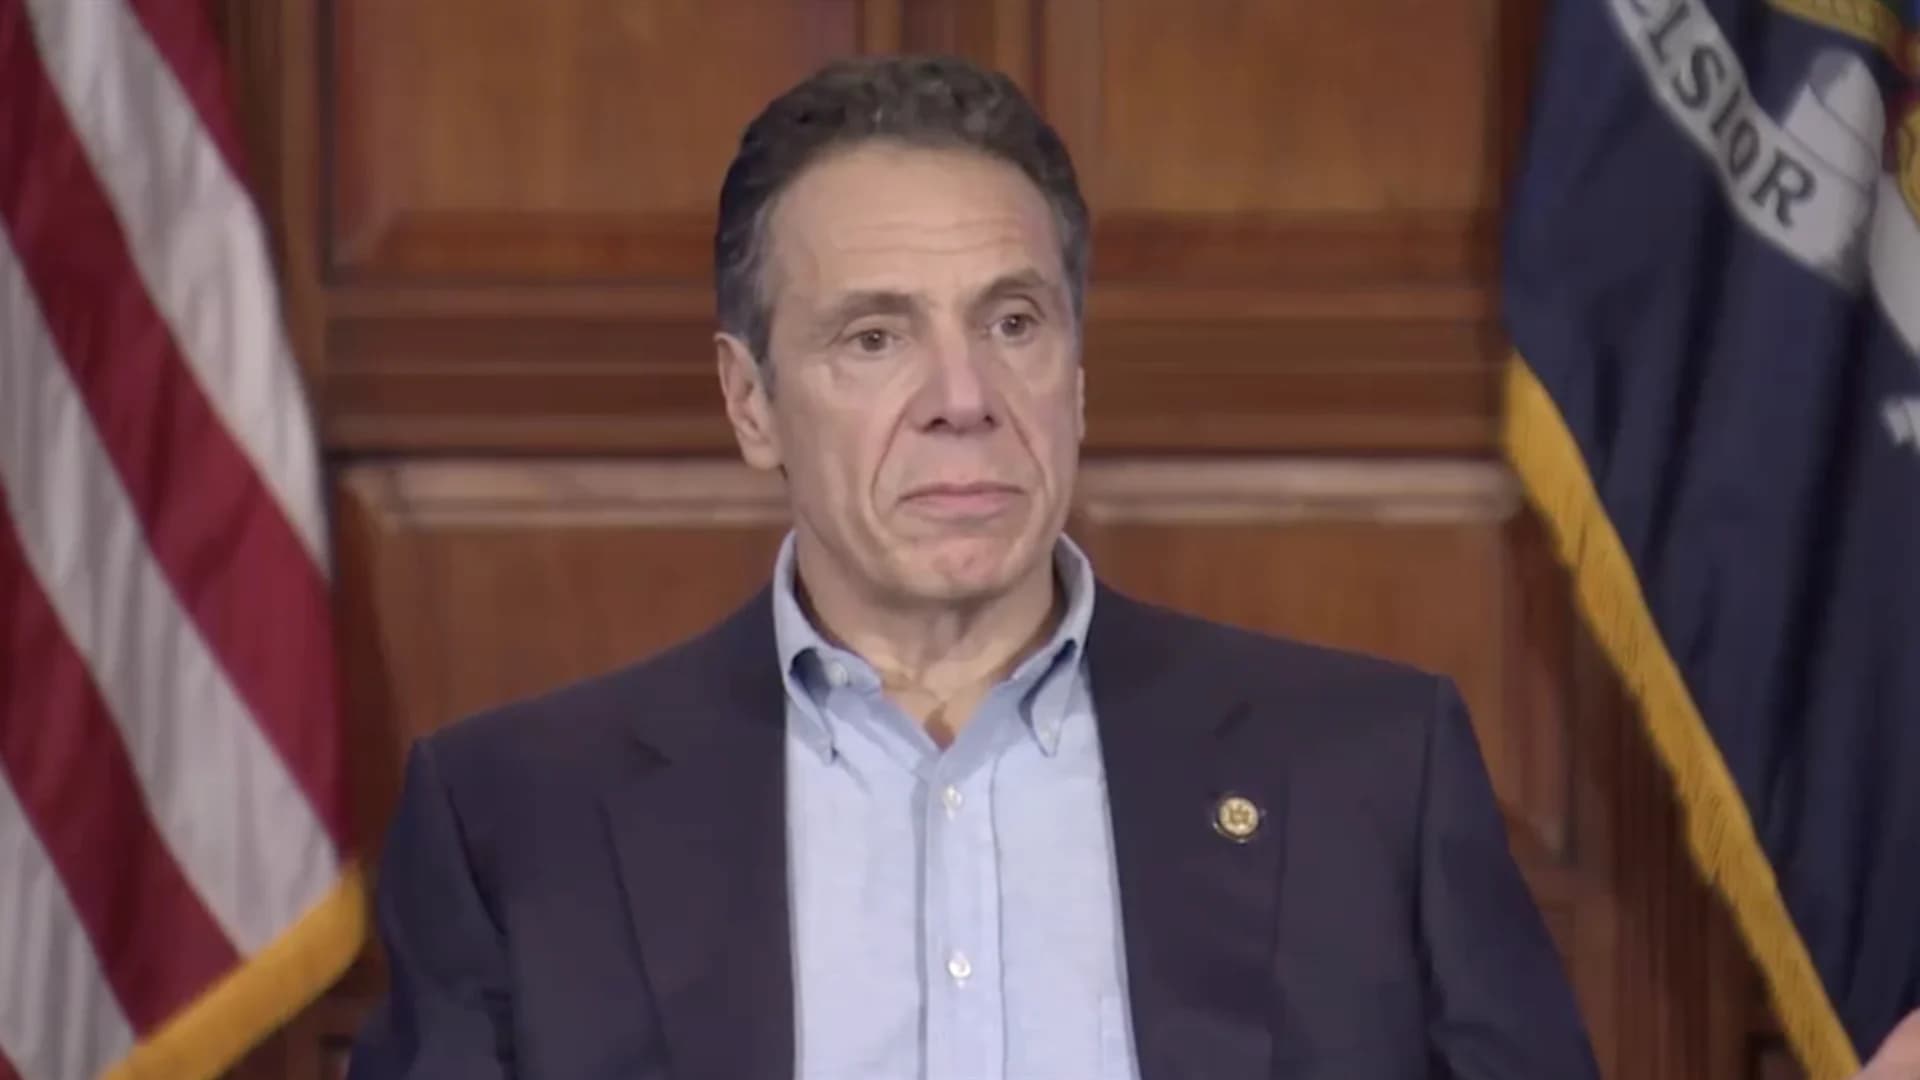 Gov. Cuomo: State may have reached apex, more data examination needed